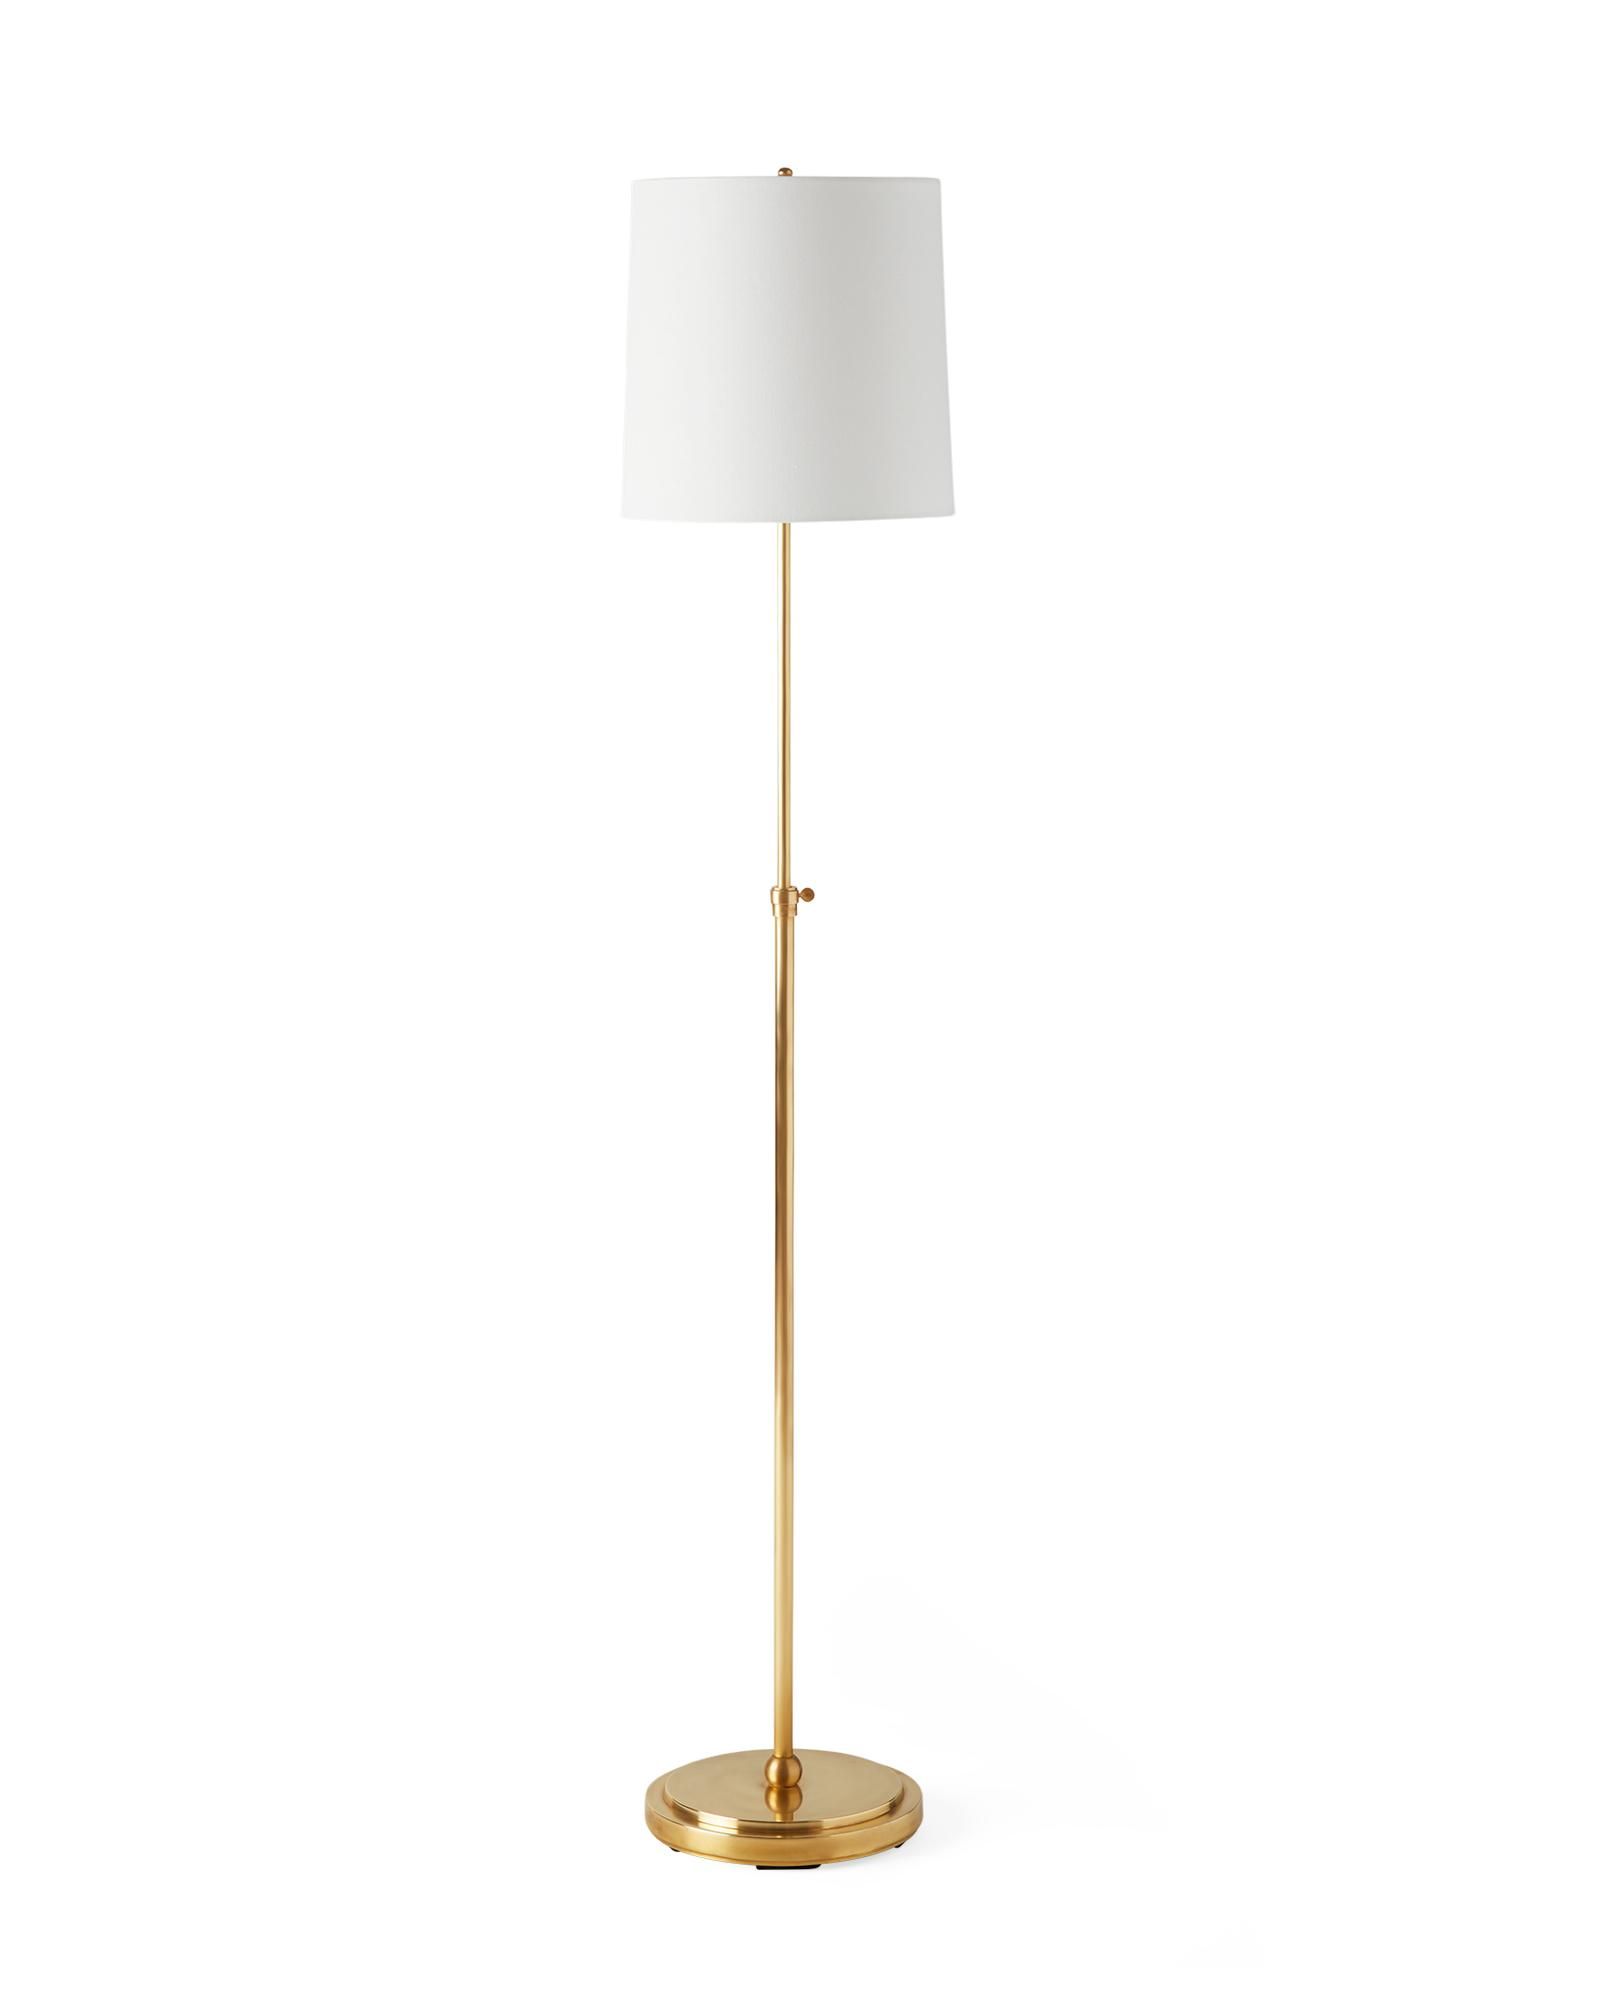 Shaw Floor Lamp | Serena and Lily